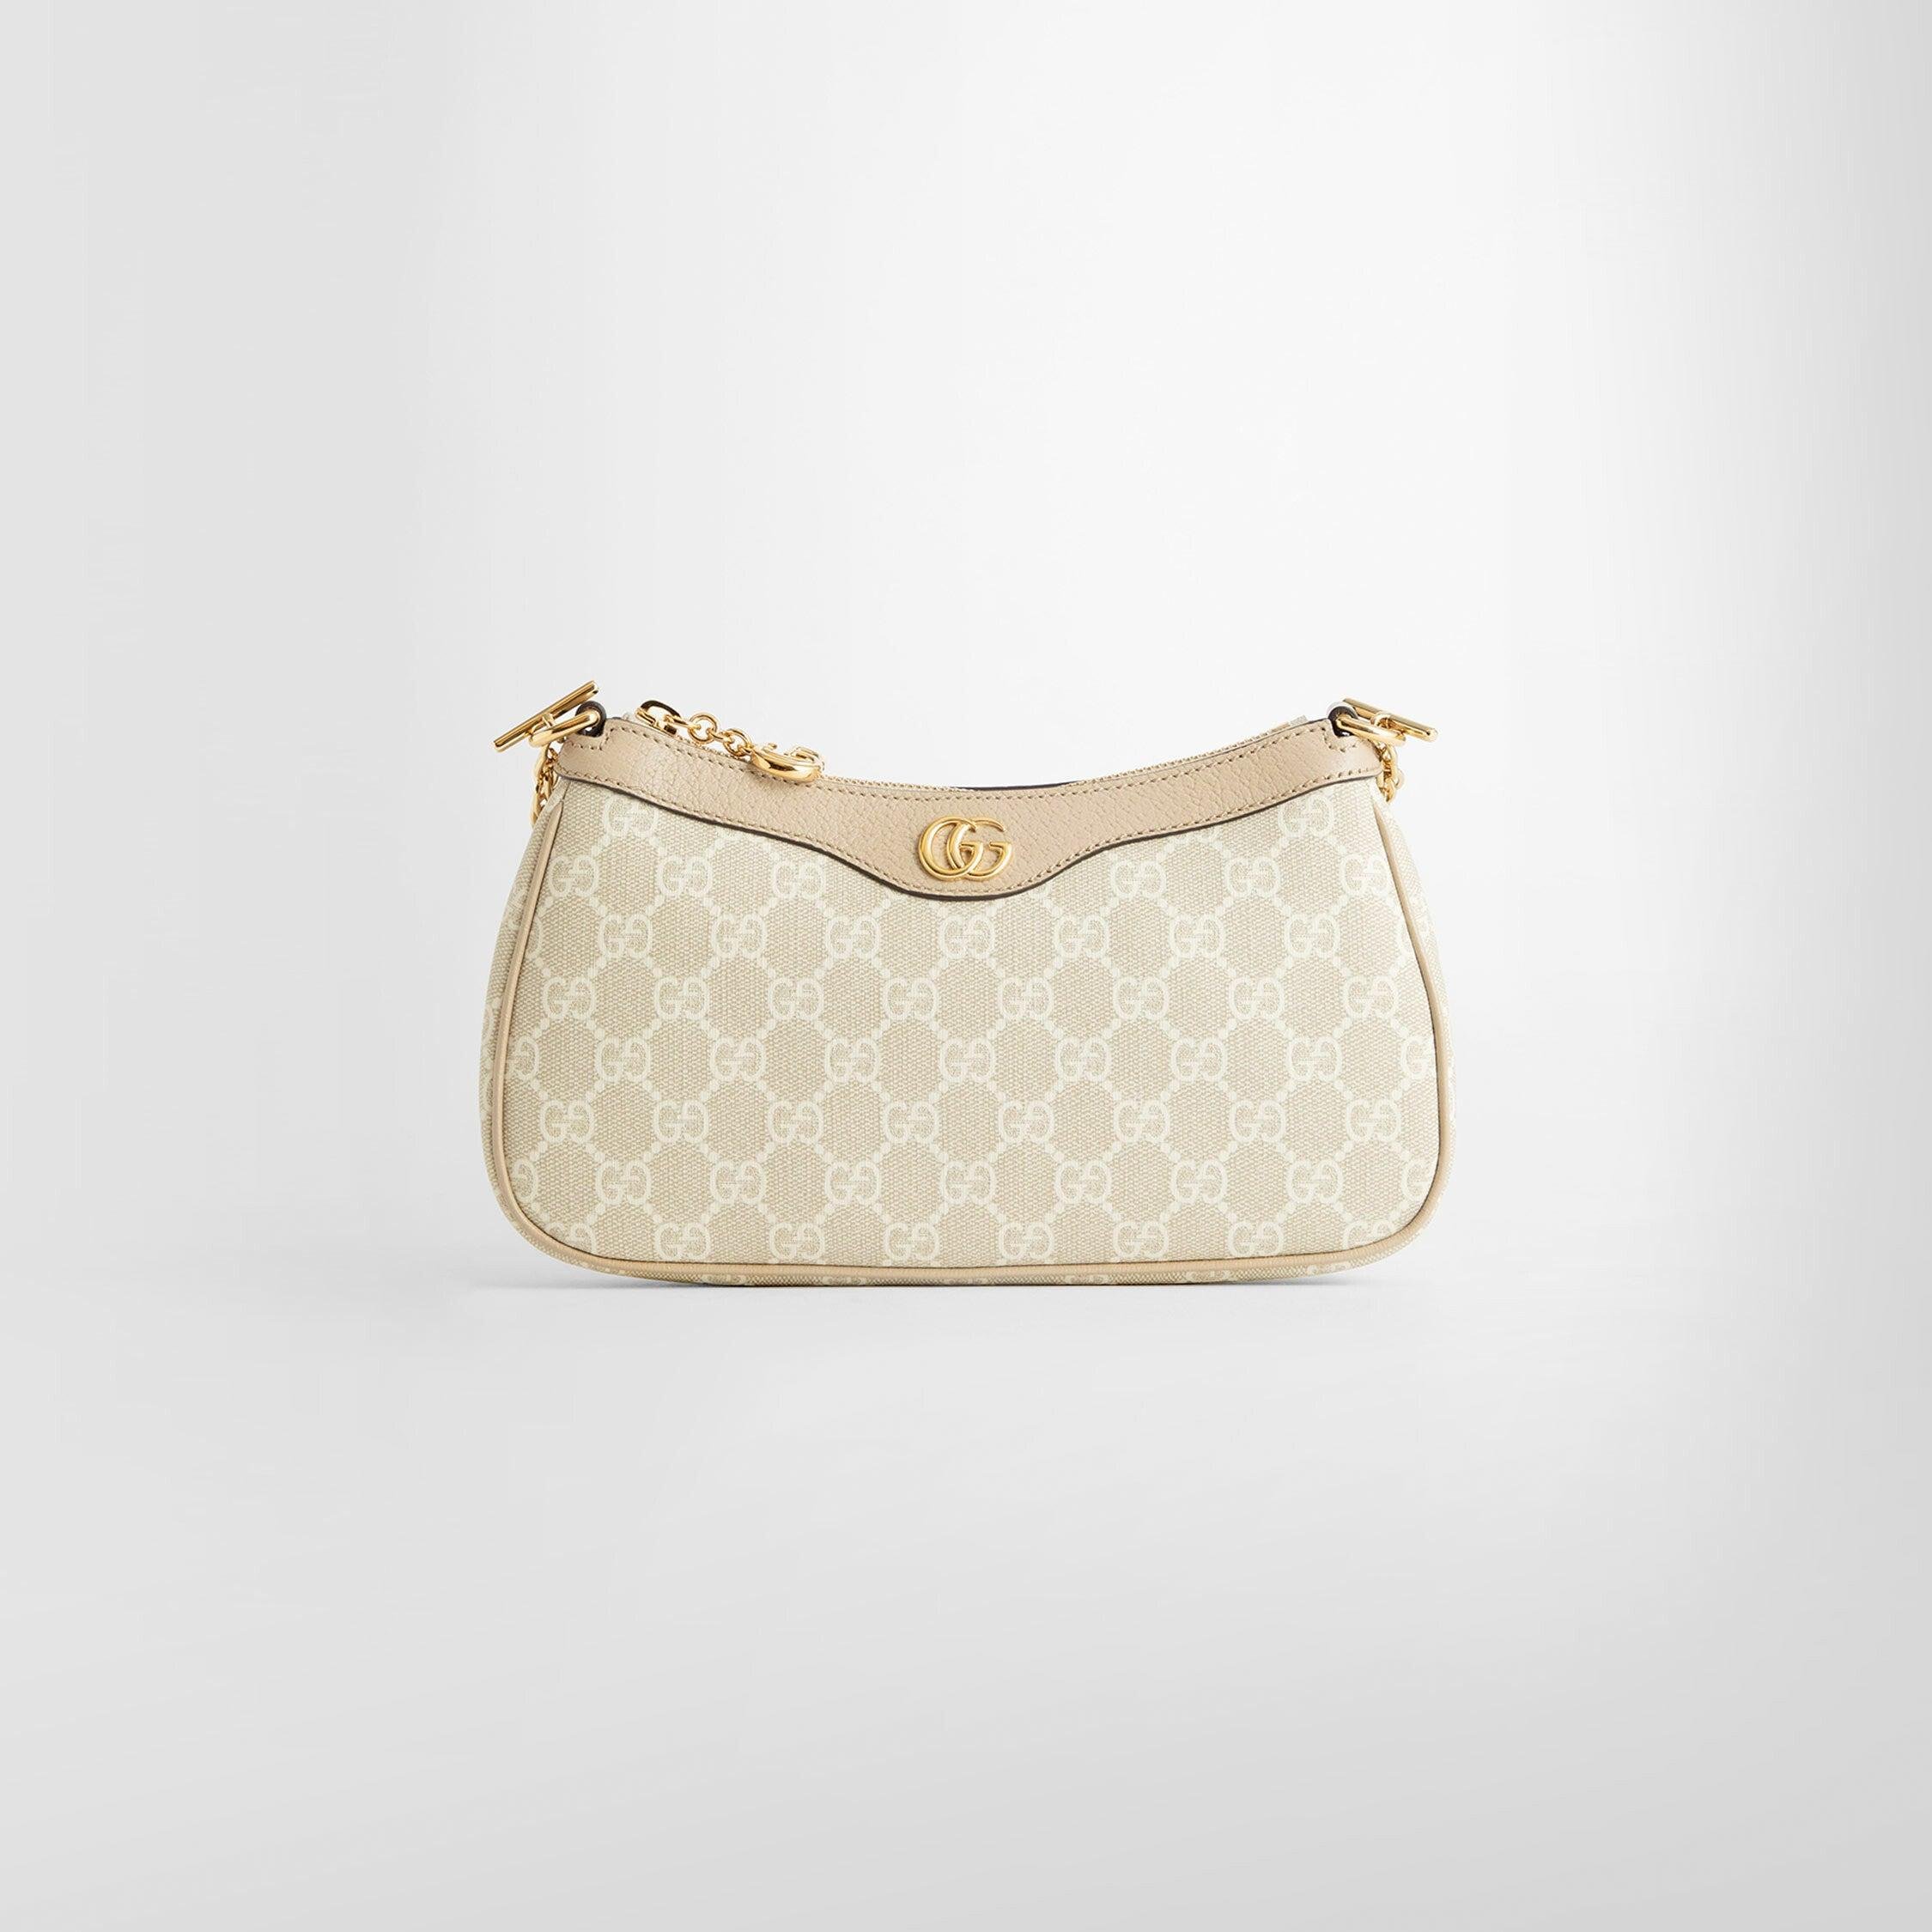 GUCCI WOMAN BEIGE TOP HANDLE BAGS by GUCCI